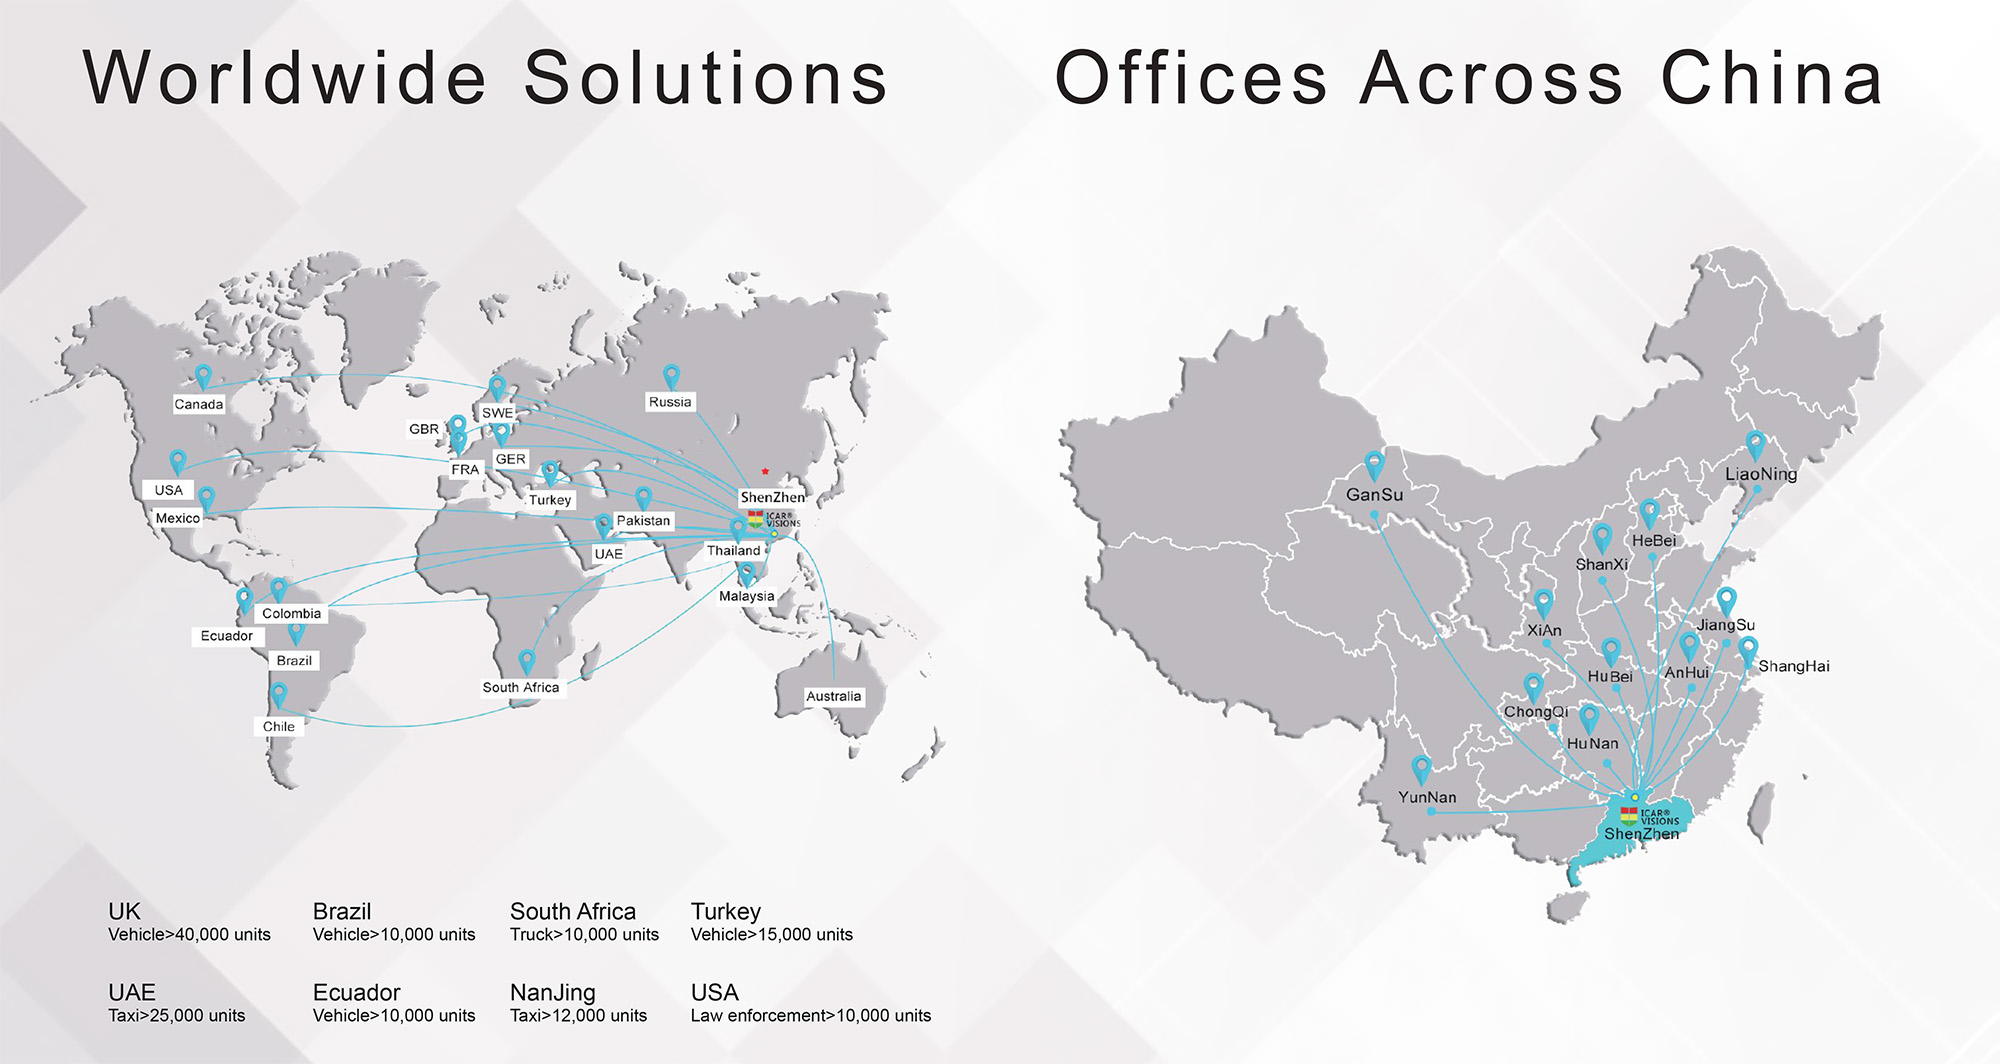 Worldwide Solutions and Offices Across China